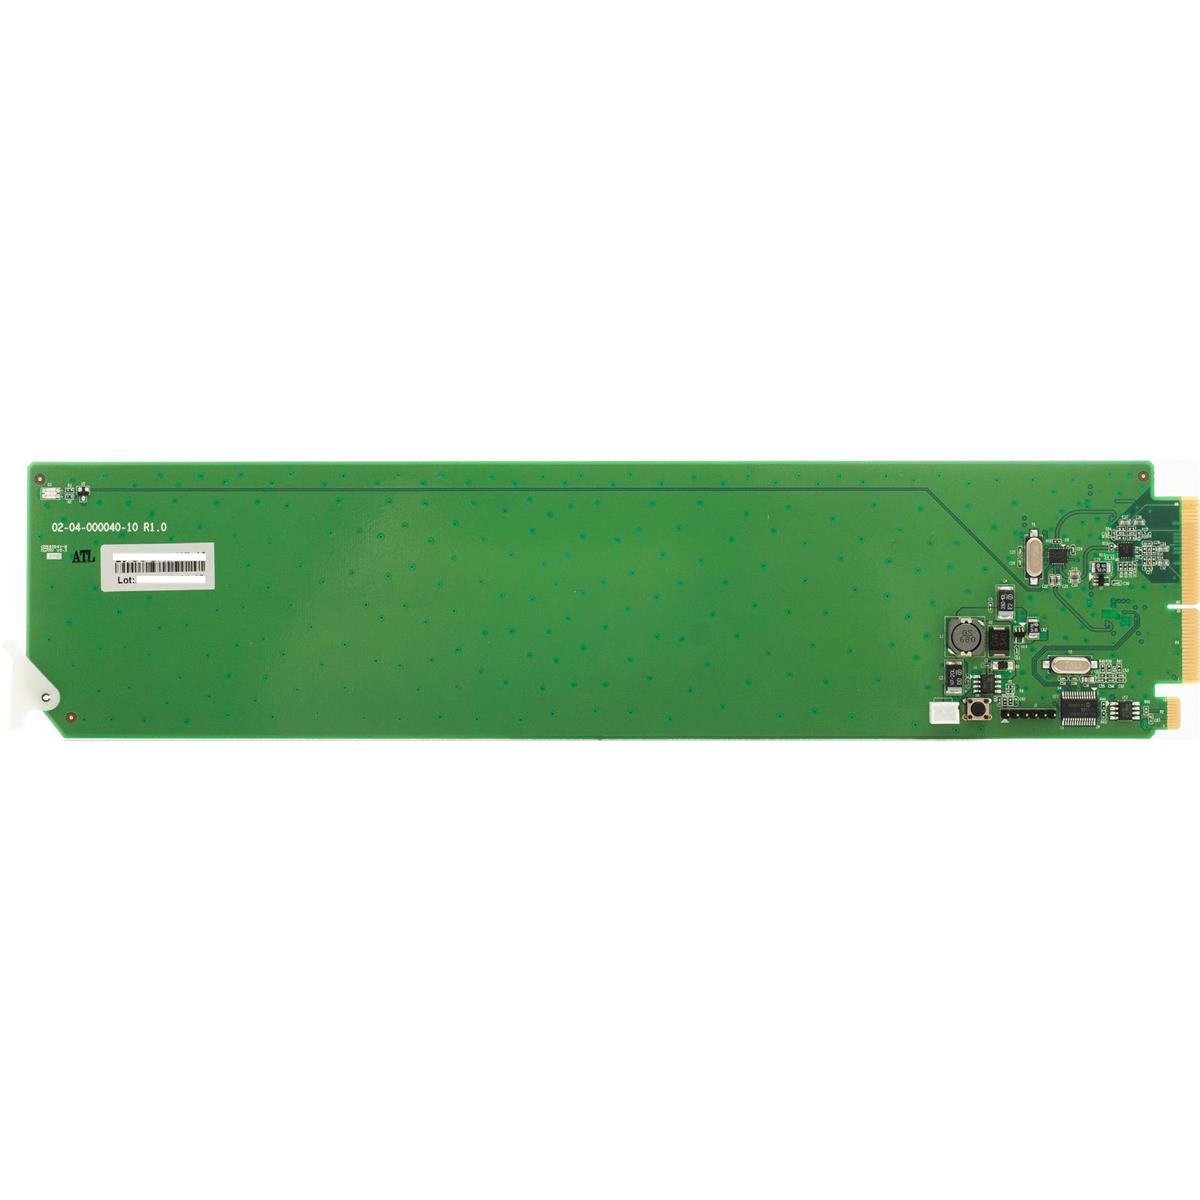 Image of Apantac openGear 1 x 4 SDI Distribution Amplifier (I/O Modules Not Included)